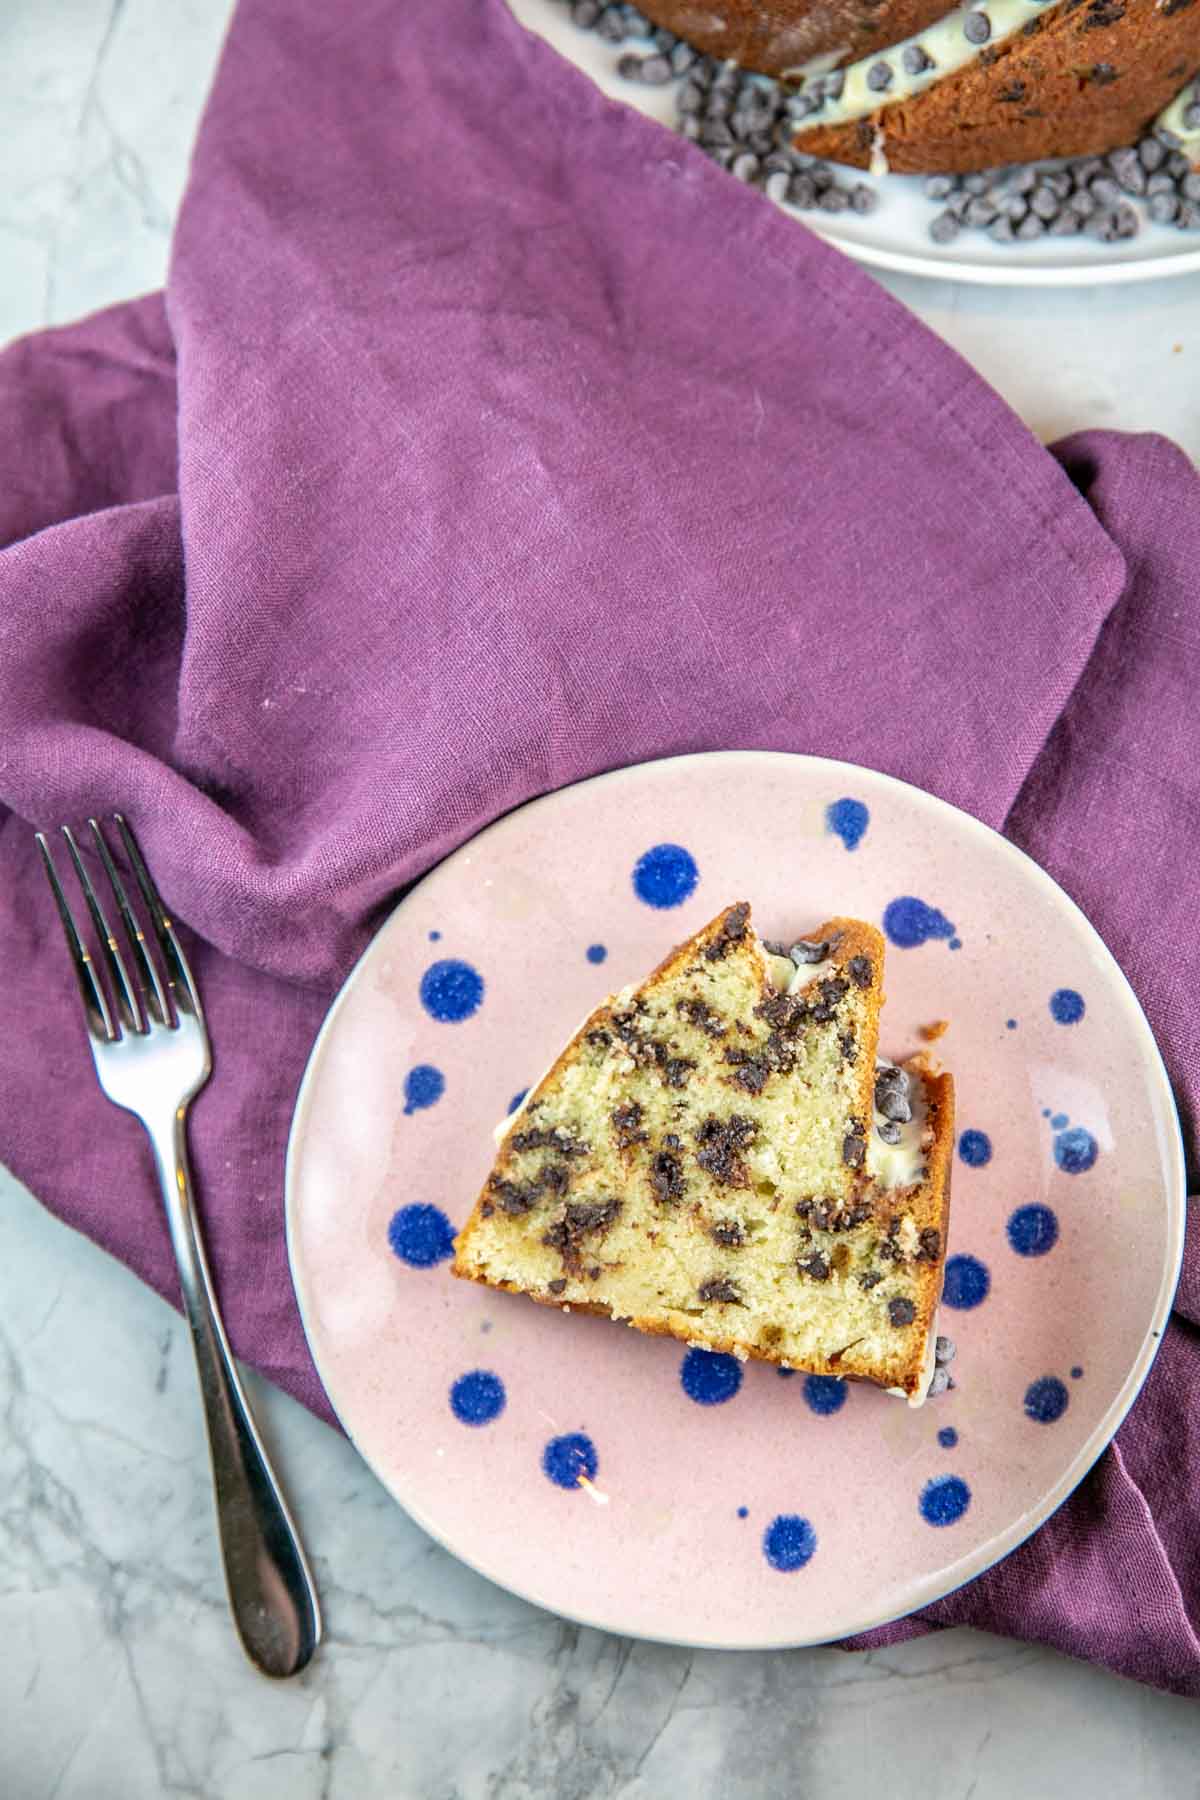 Slice of cake on a pink plate with blue polka dots and a silver fork. 